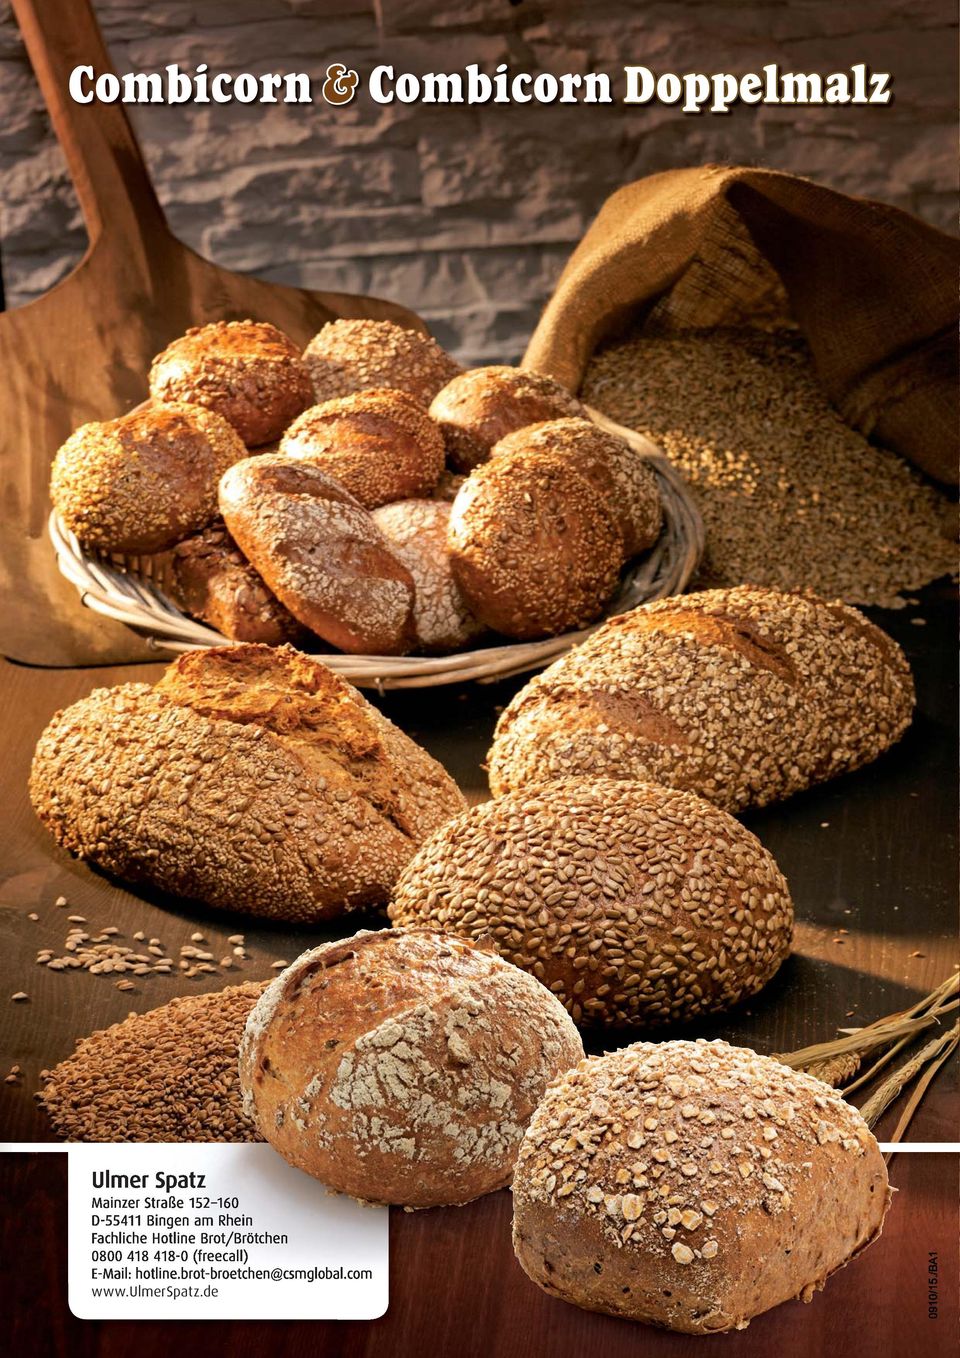 Brot/Brötchen 0800 418 418-0 (freecall) E-Mail: hotline.